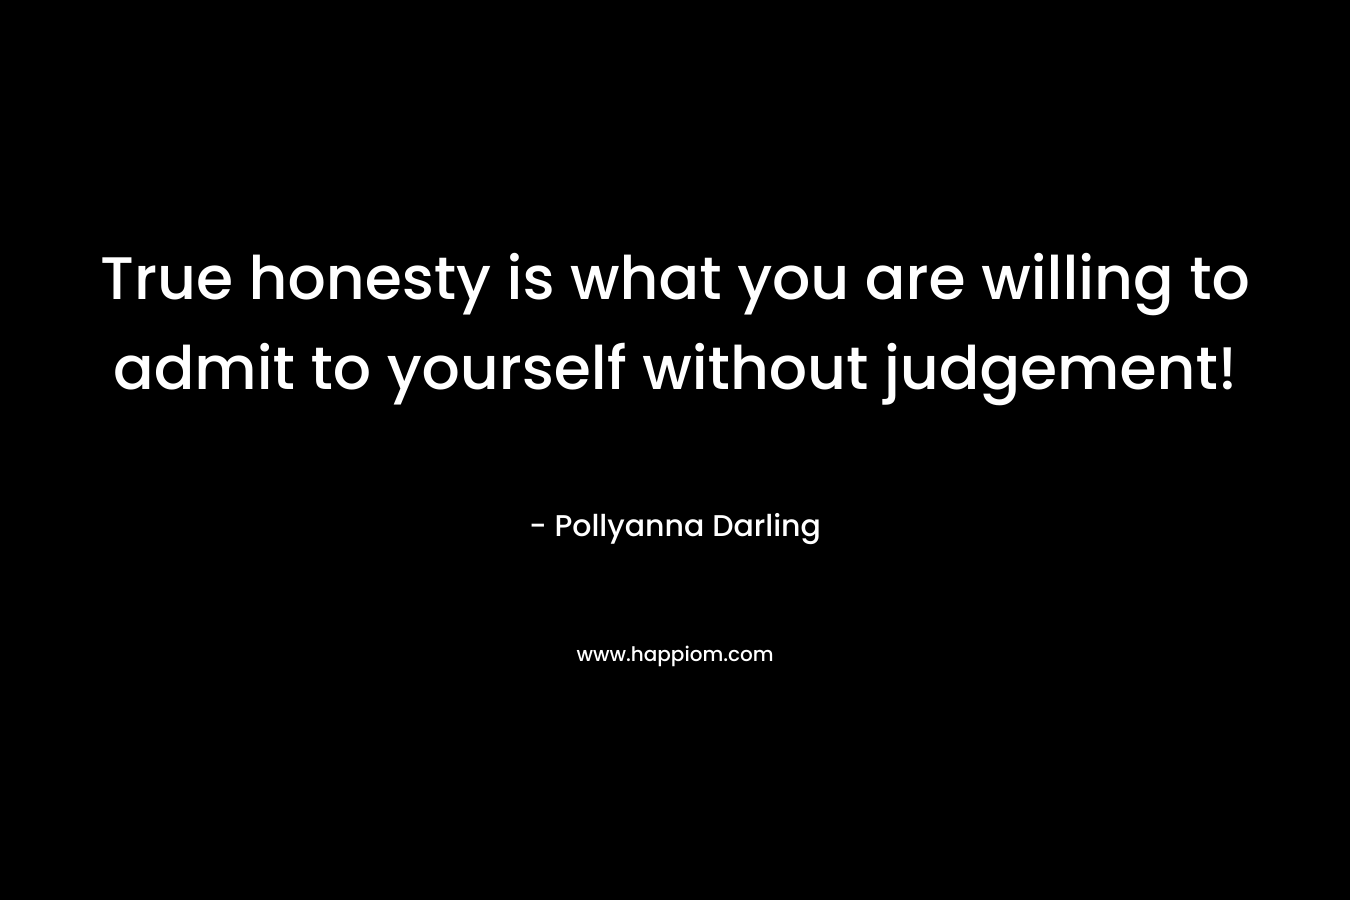 True honesty is what you are willing to admit to yourself without judgement! – Pollyanna Darling